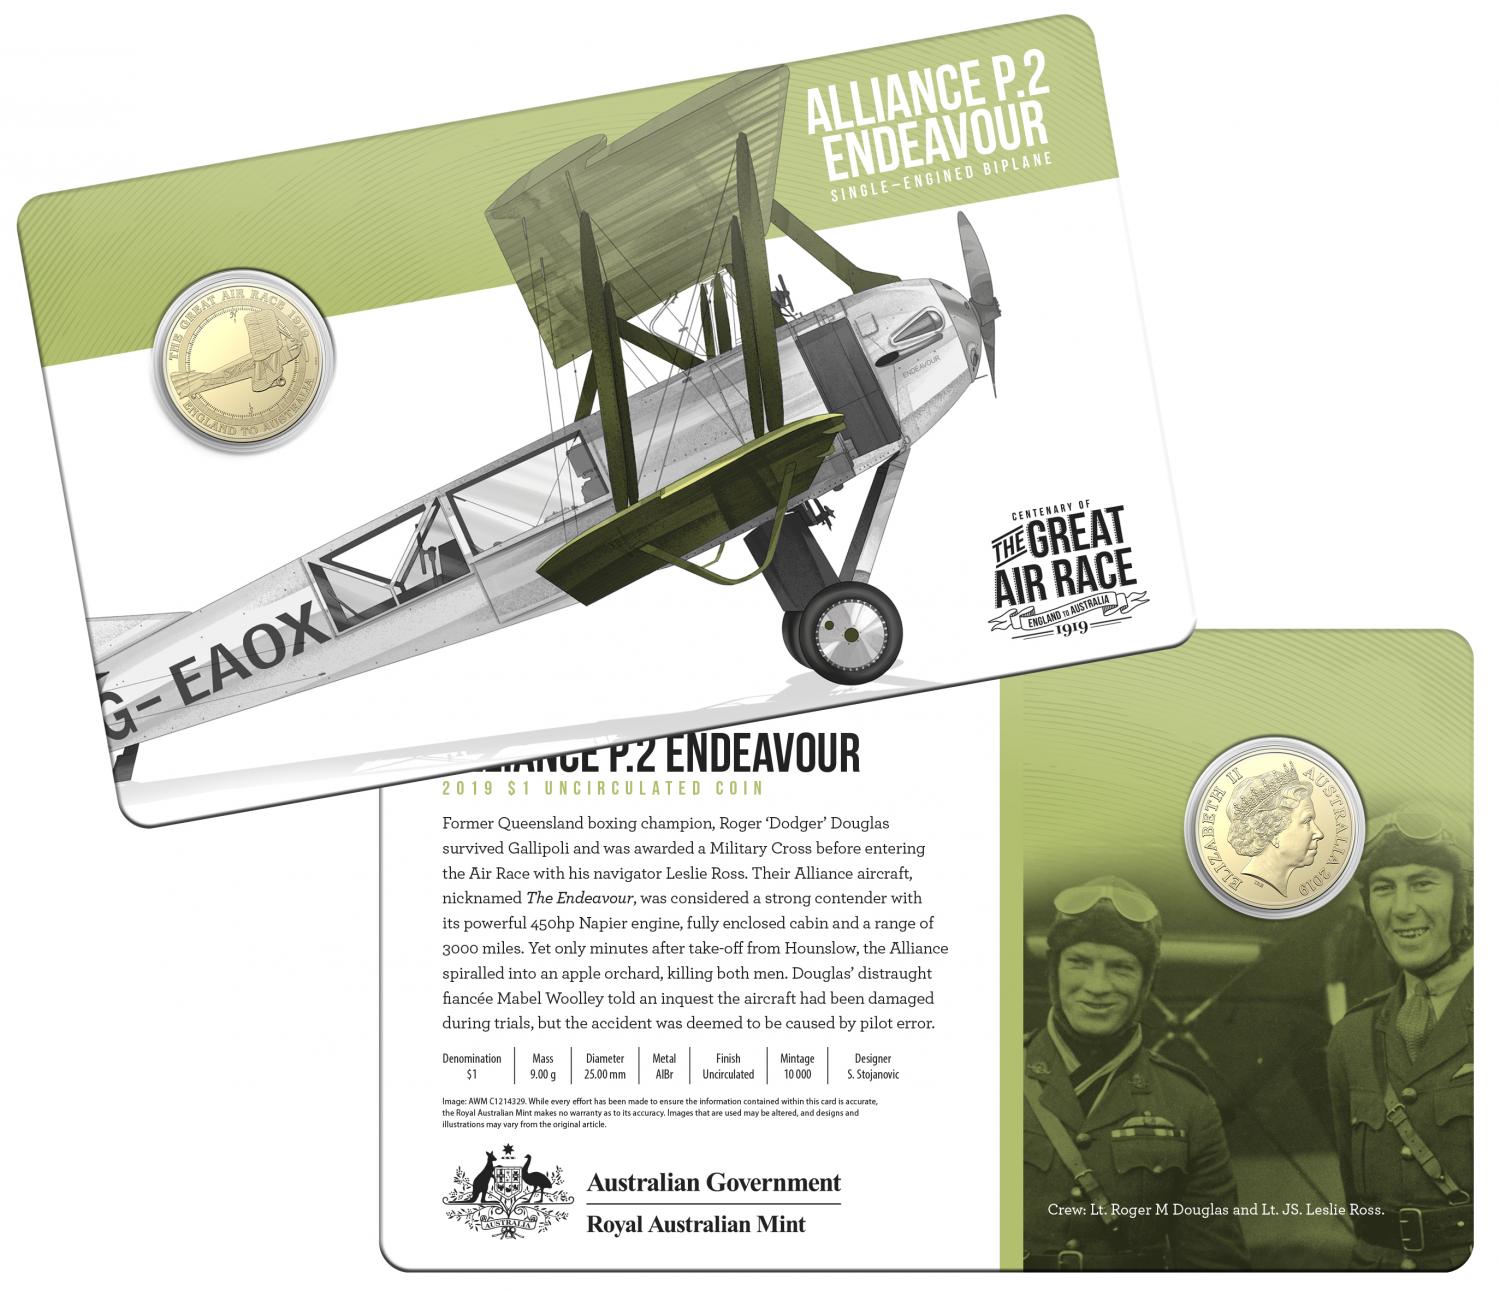 Thumbnail for 2019 Centenary off the Great Air Race Uncirculated $1.00 - Alliance P.2 Endeavour